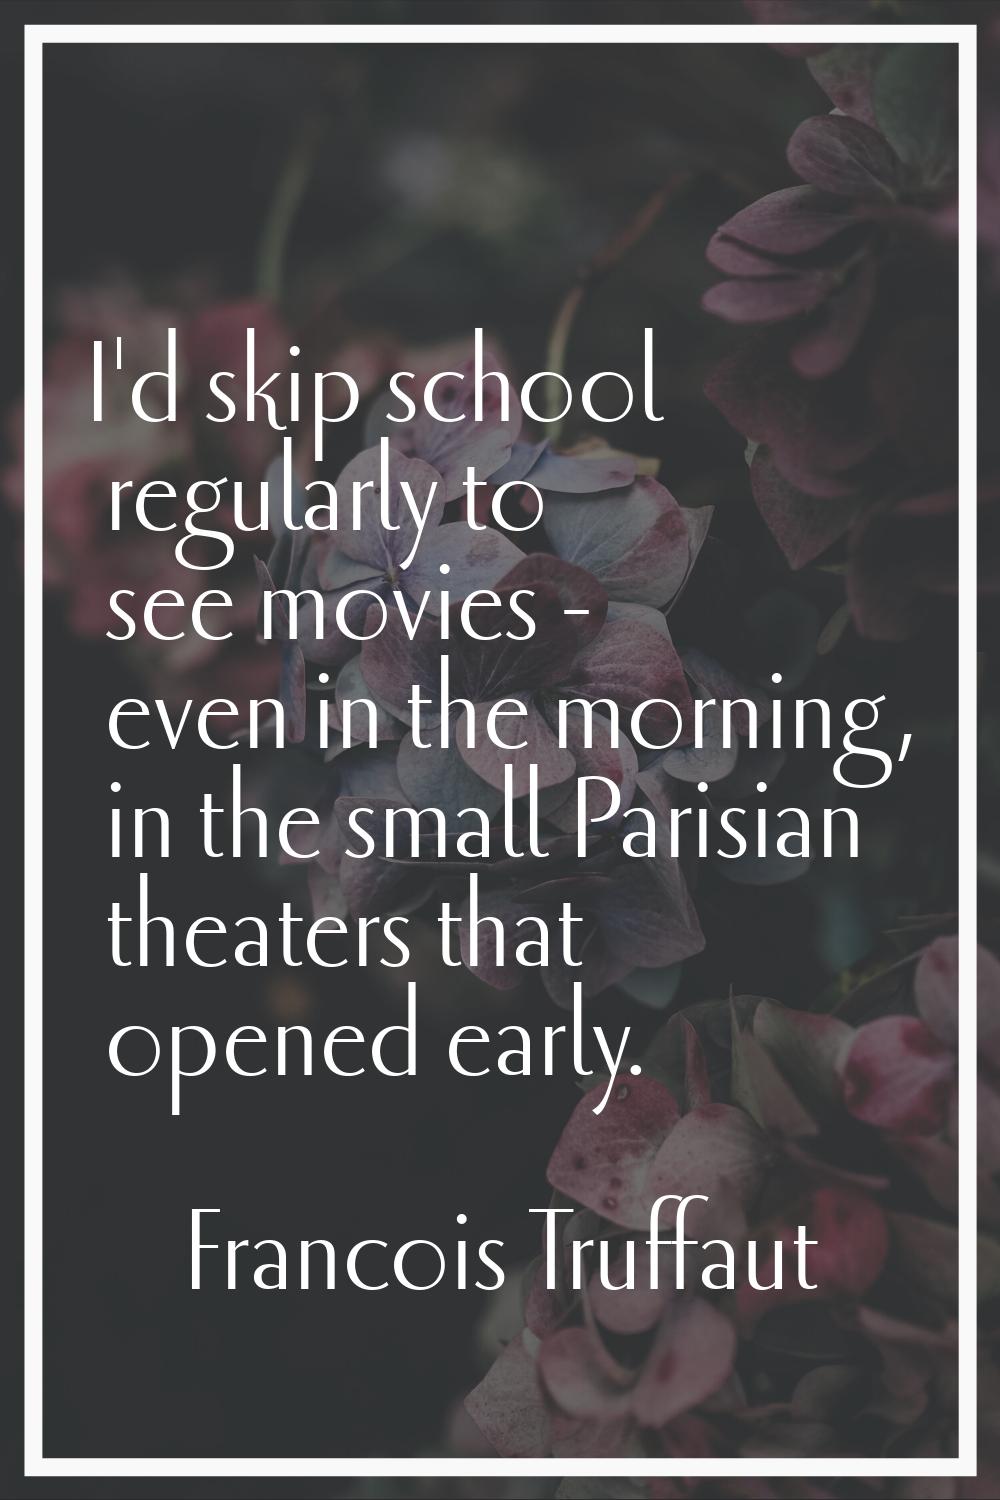 I'd skip school regularly to see movies - even in the morning, in the small Parisian theaters that 